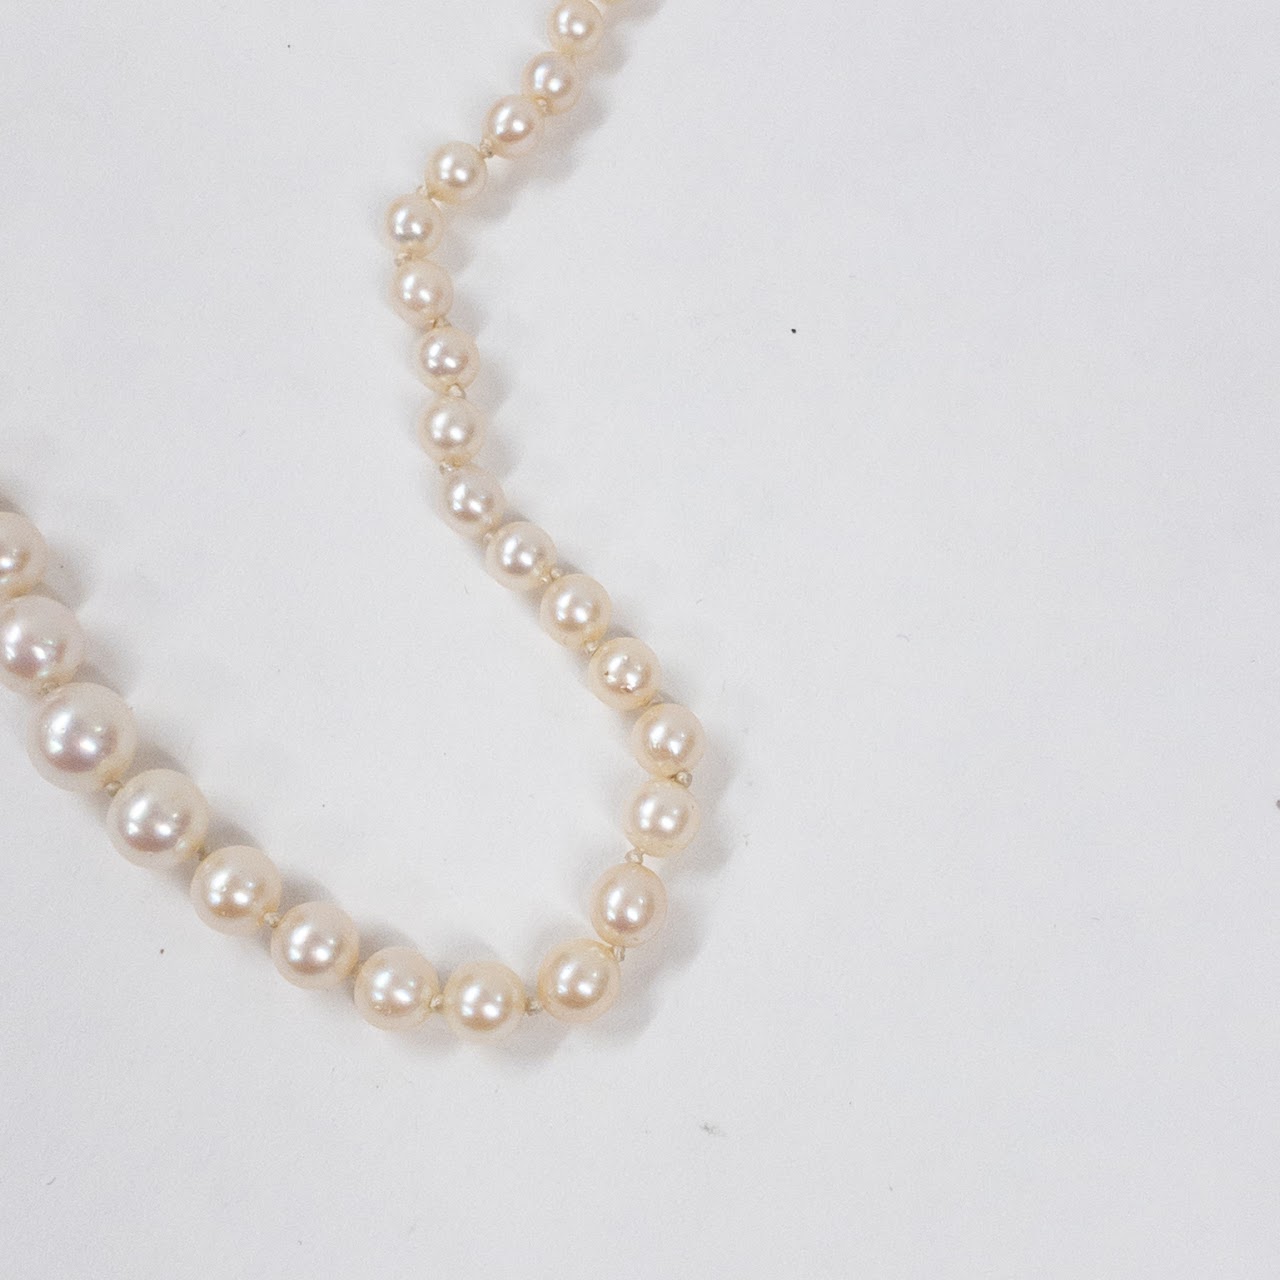 14K White Gold and Graduated Pearl Choker Necklace